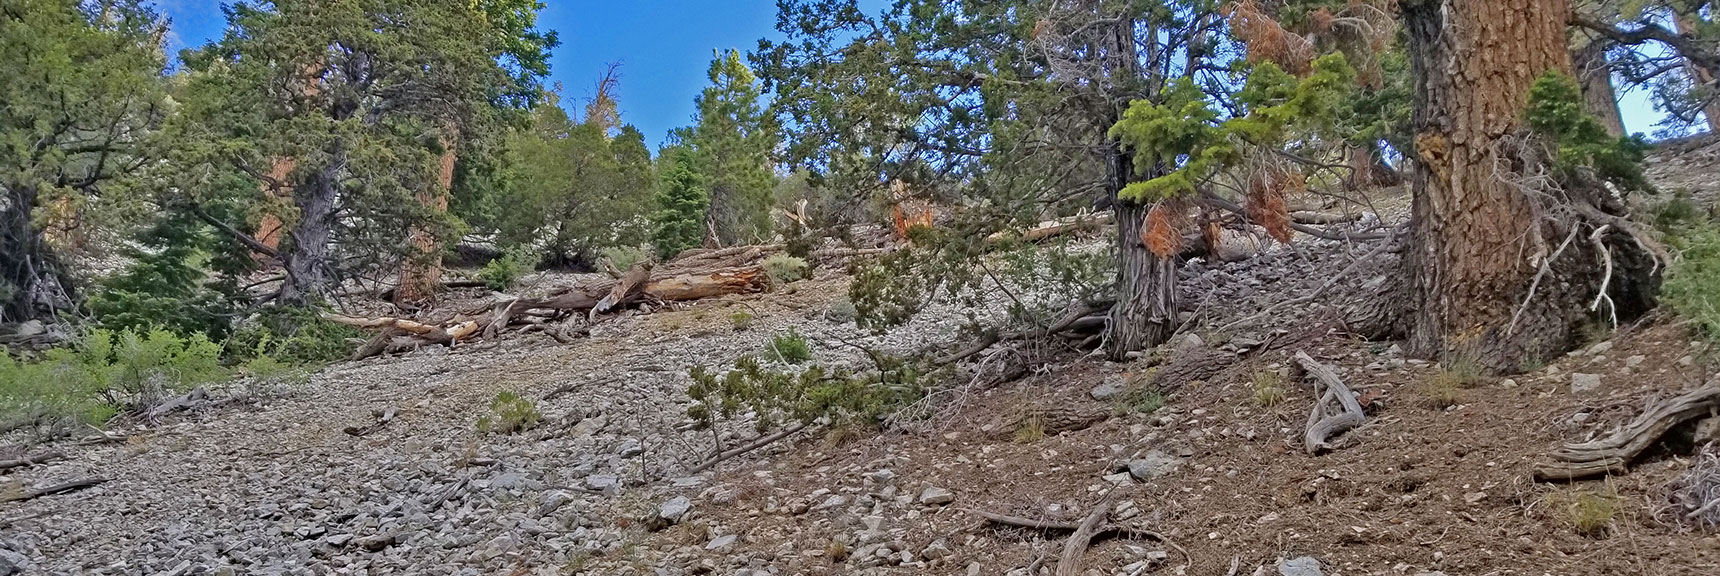 Heading Up "The Slope of Death" Steep Loose Rock Avalanche Mid Ridge Slope. | The Sisters South | Lee Canyon | Mt Charleston Wilderness | Spring Mountains, Nevada